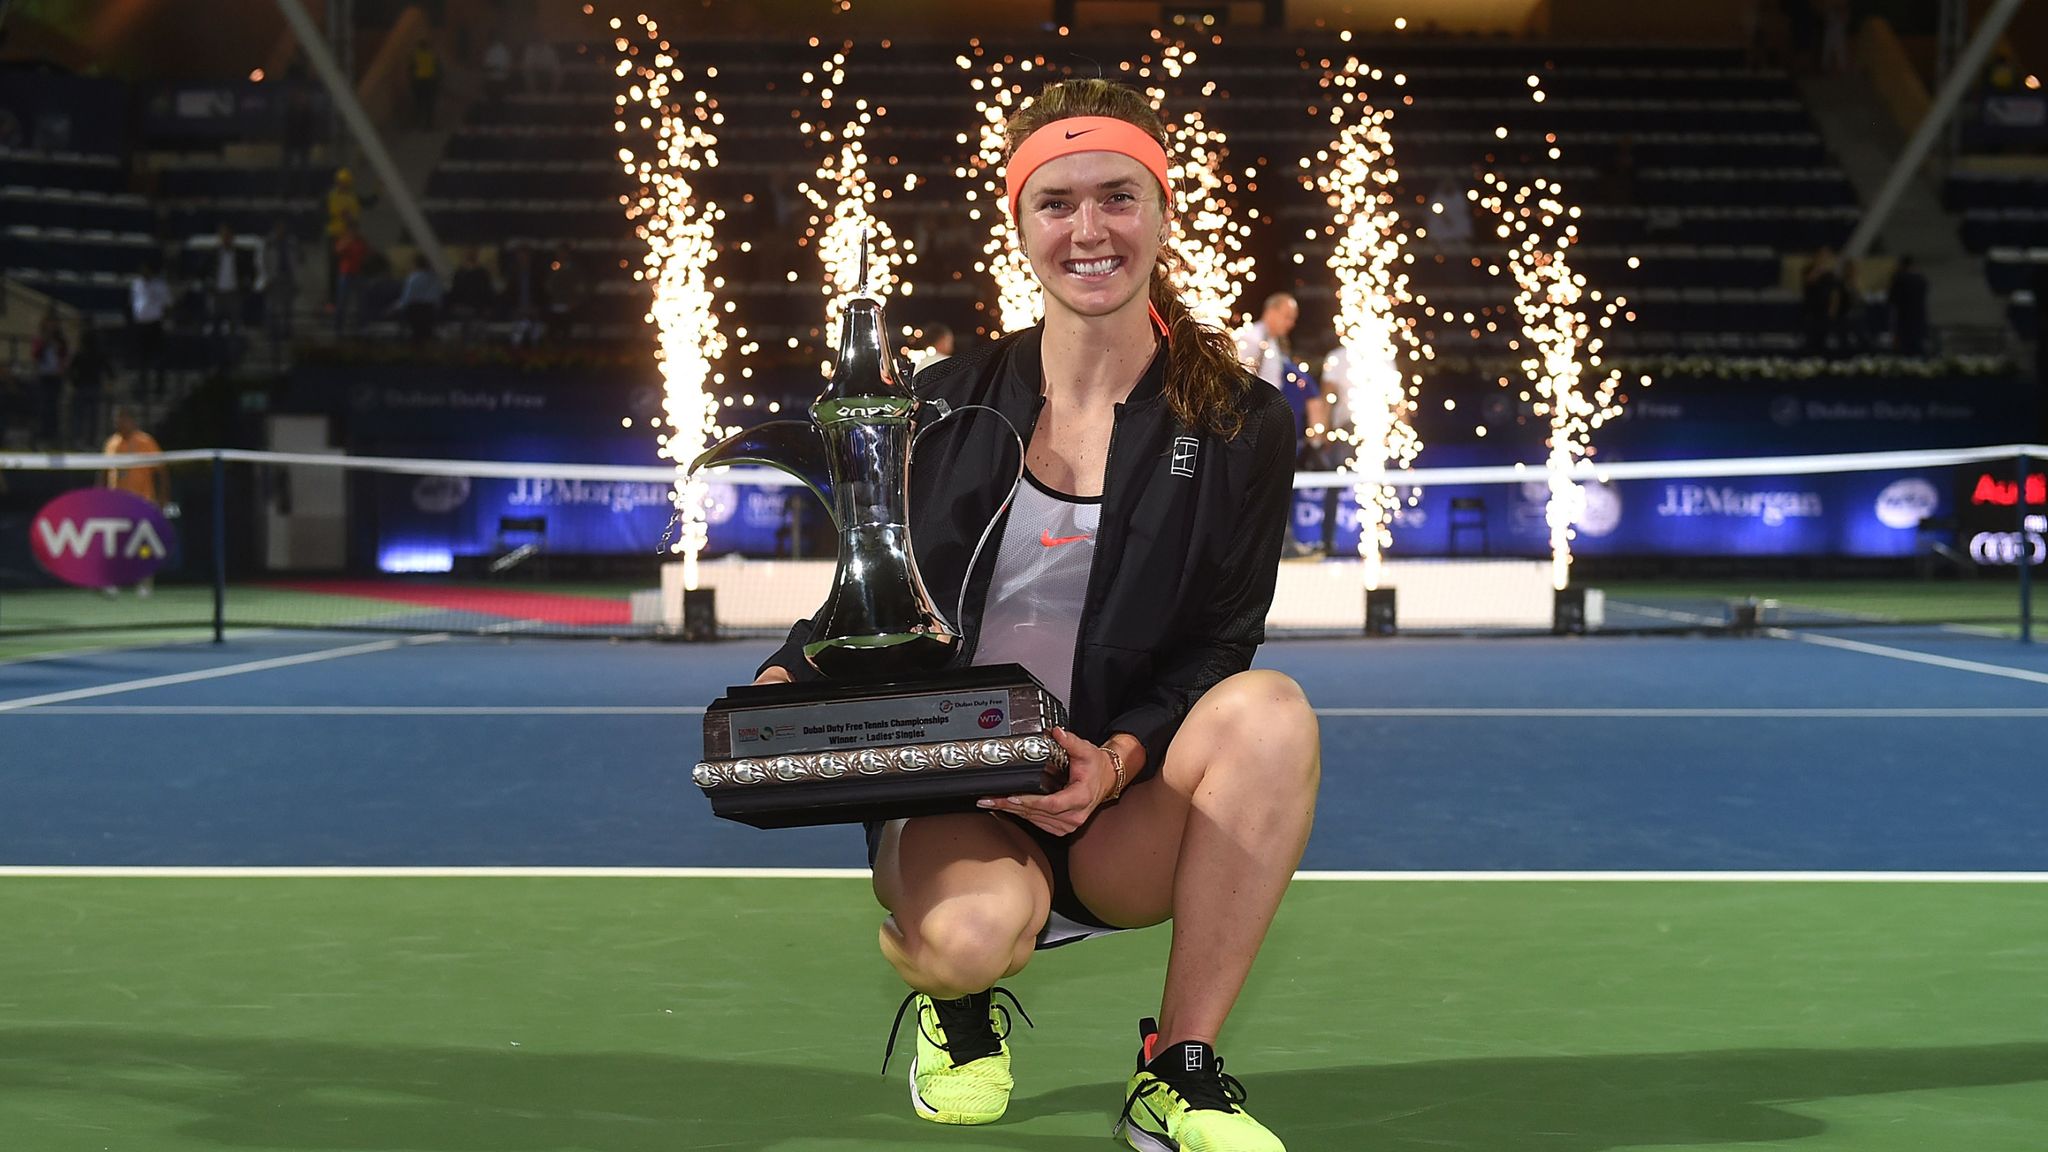 WTA Dubai Open 2023: Where to watch, live streaming details, and